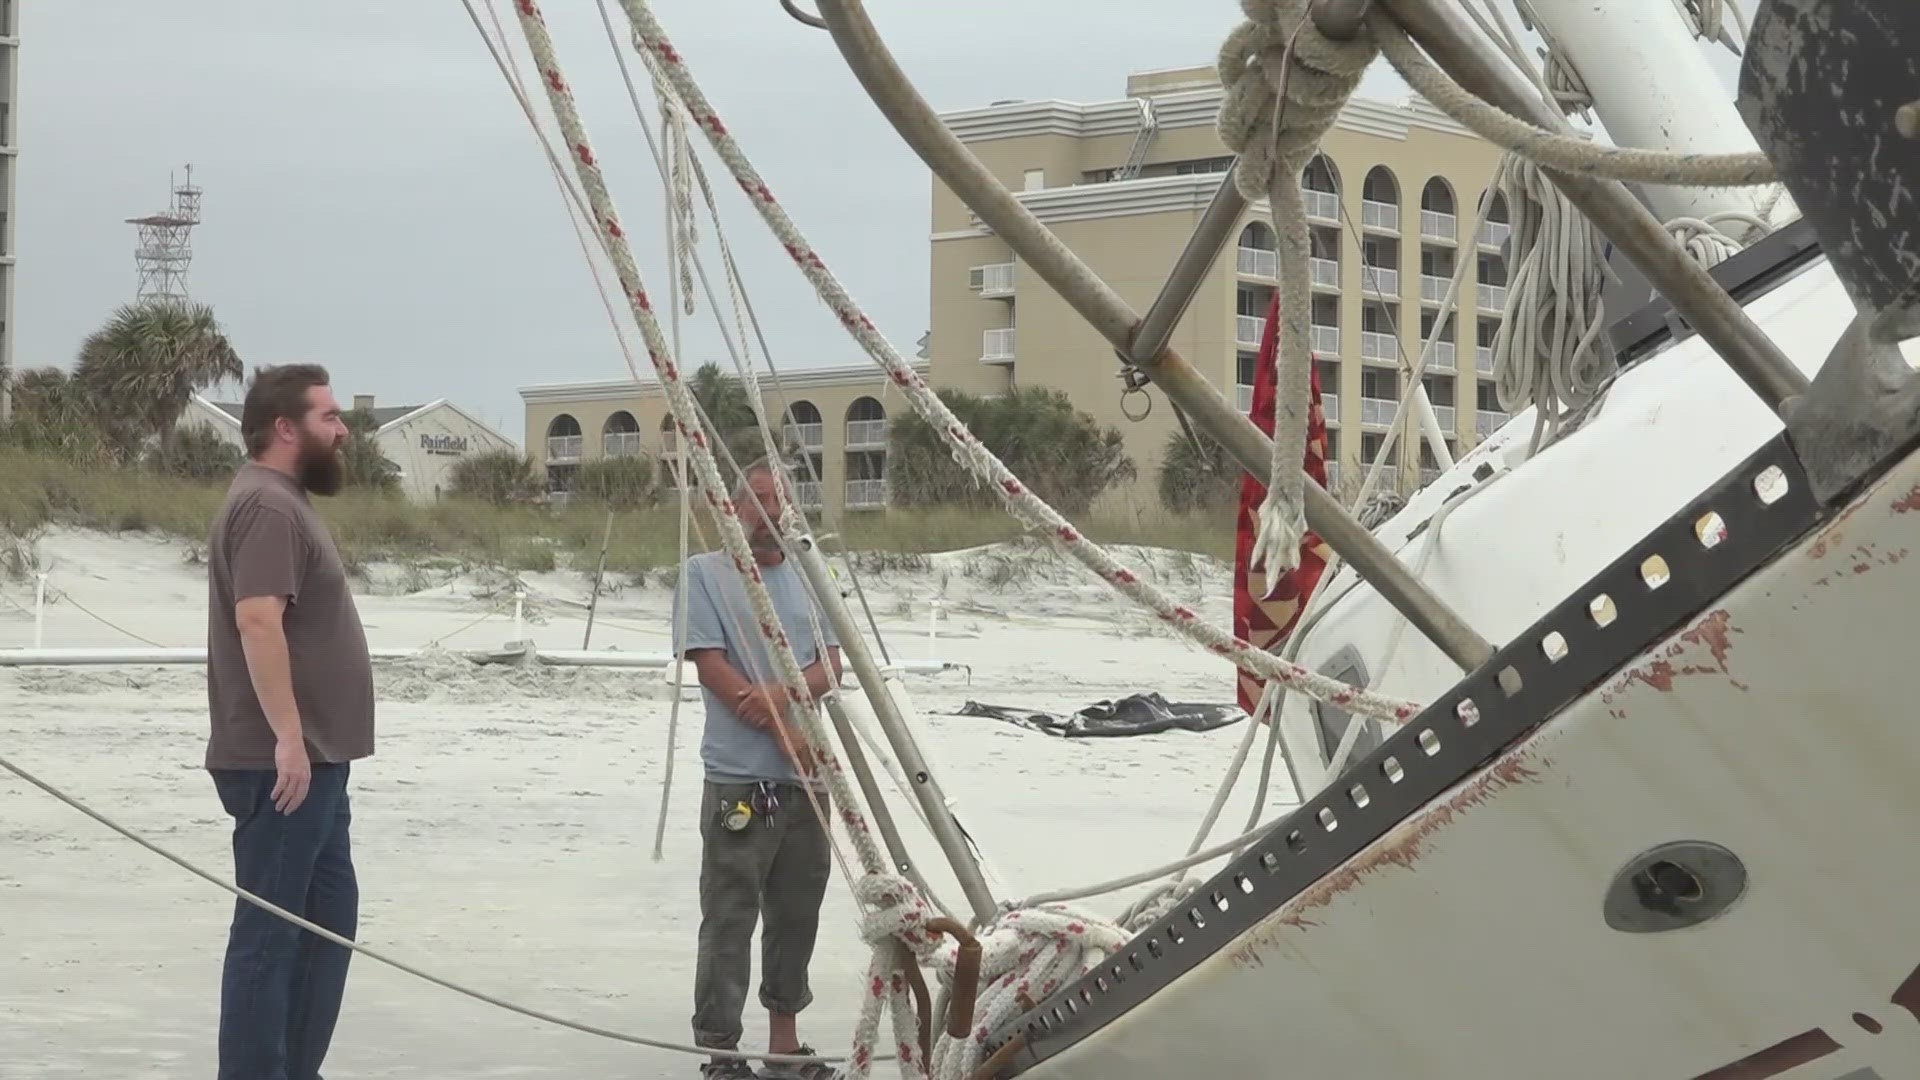 Ever since Luke Rehberg's boat washed ashore on Jacksonville Beach 3 weeks ago, the man says he will become a First Coast resident as the boat will be demolished.